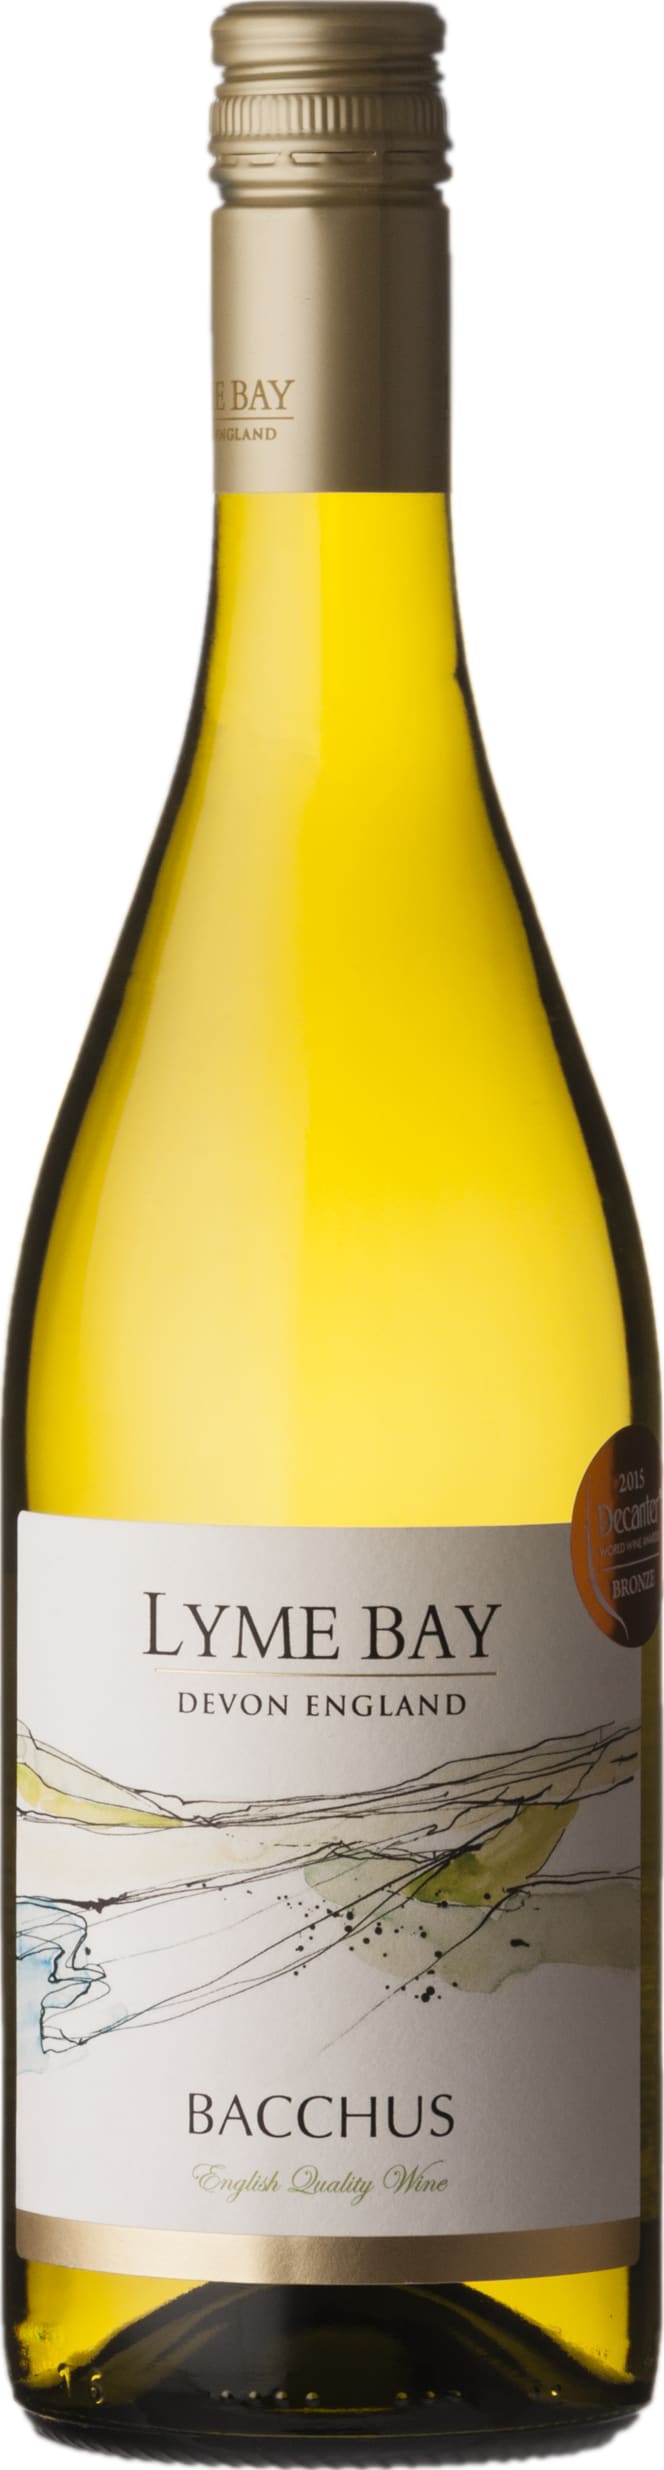 Lyme Bay Sandbar Bacchus 2021 75cl - Buy Lyme Bay Wines from GREAT WINES DIRECT wine shop